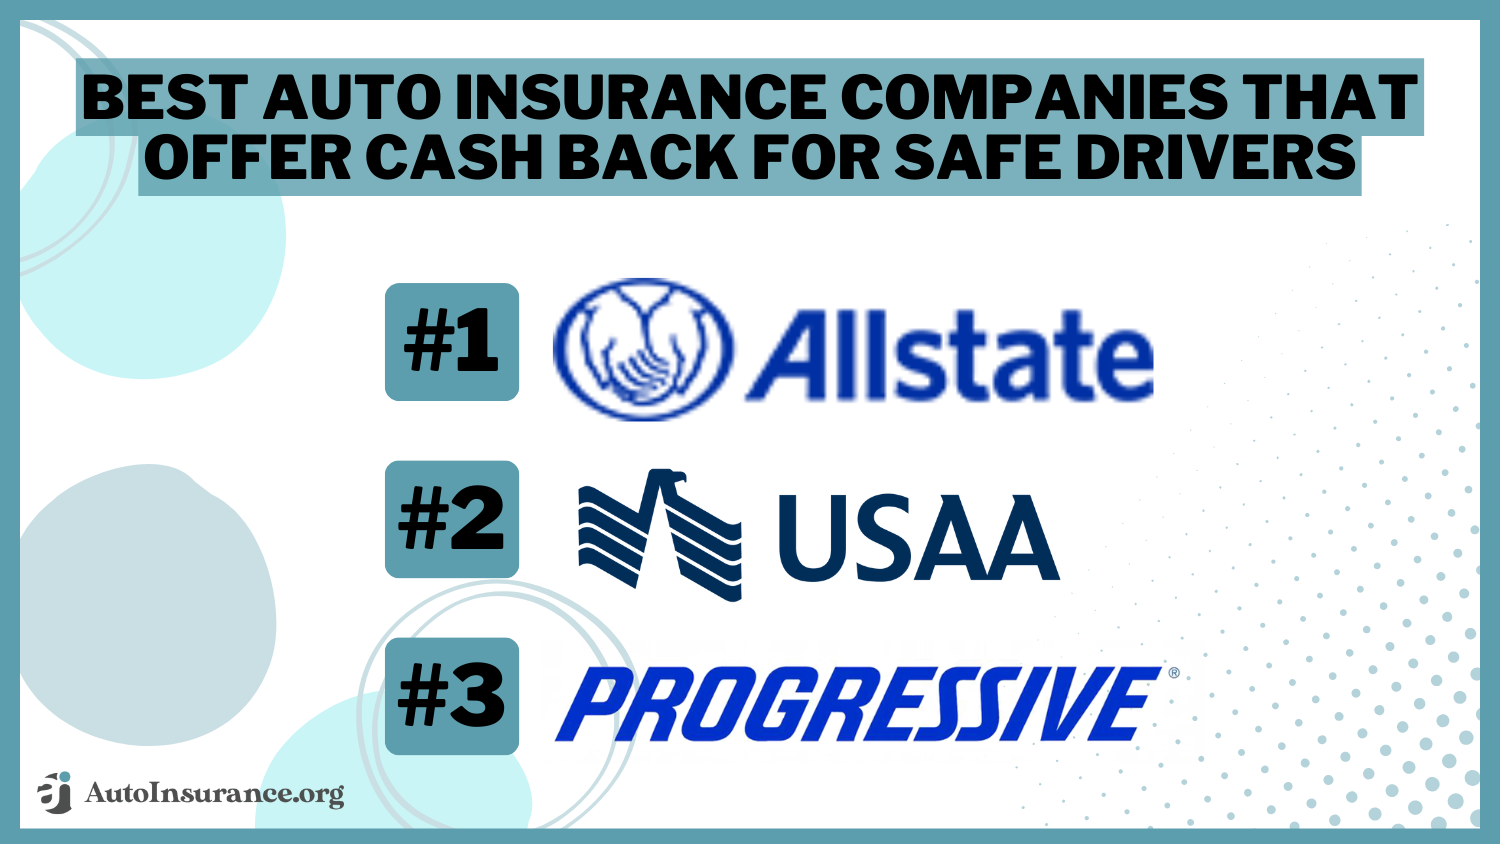 Allstate, USAA Progressive best auto insurance companies that offer cash back for safe drivers